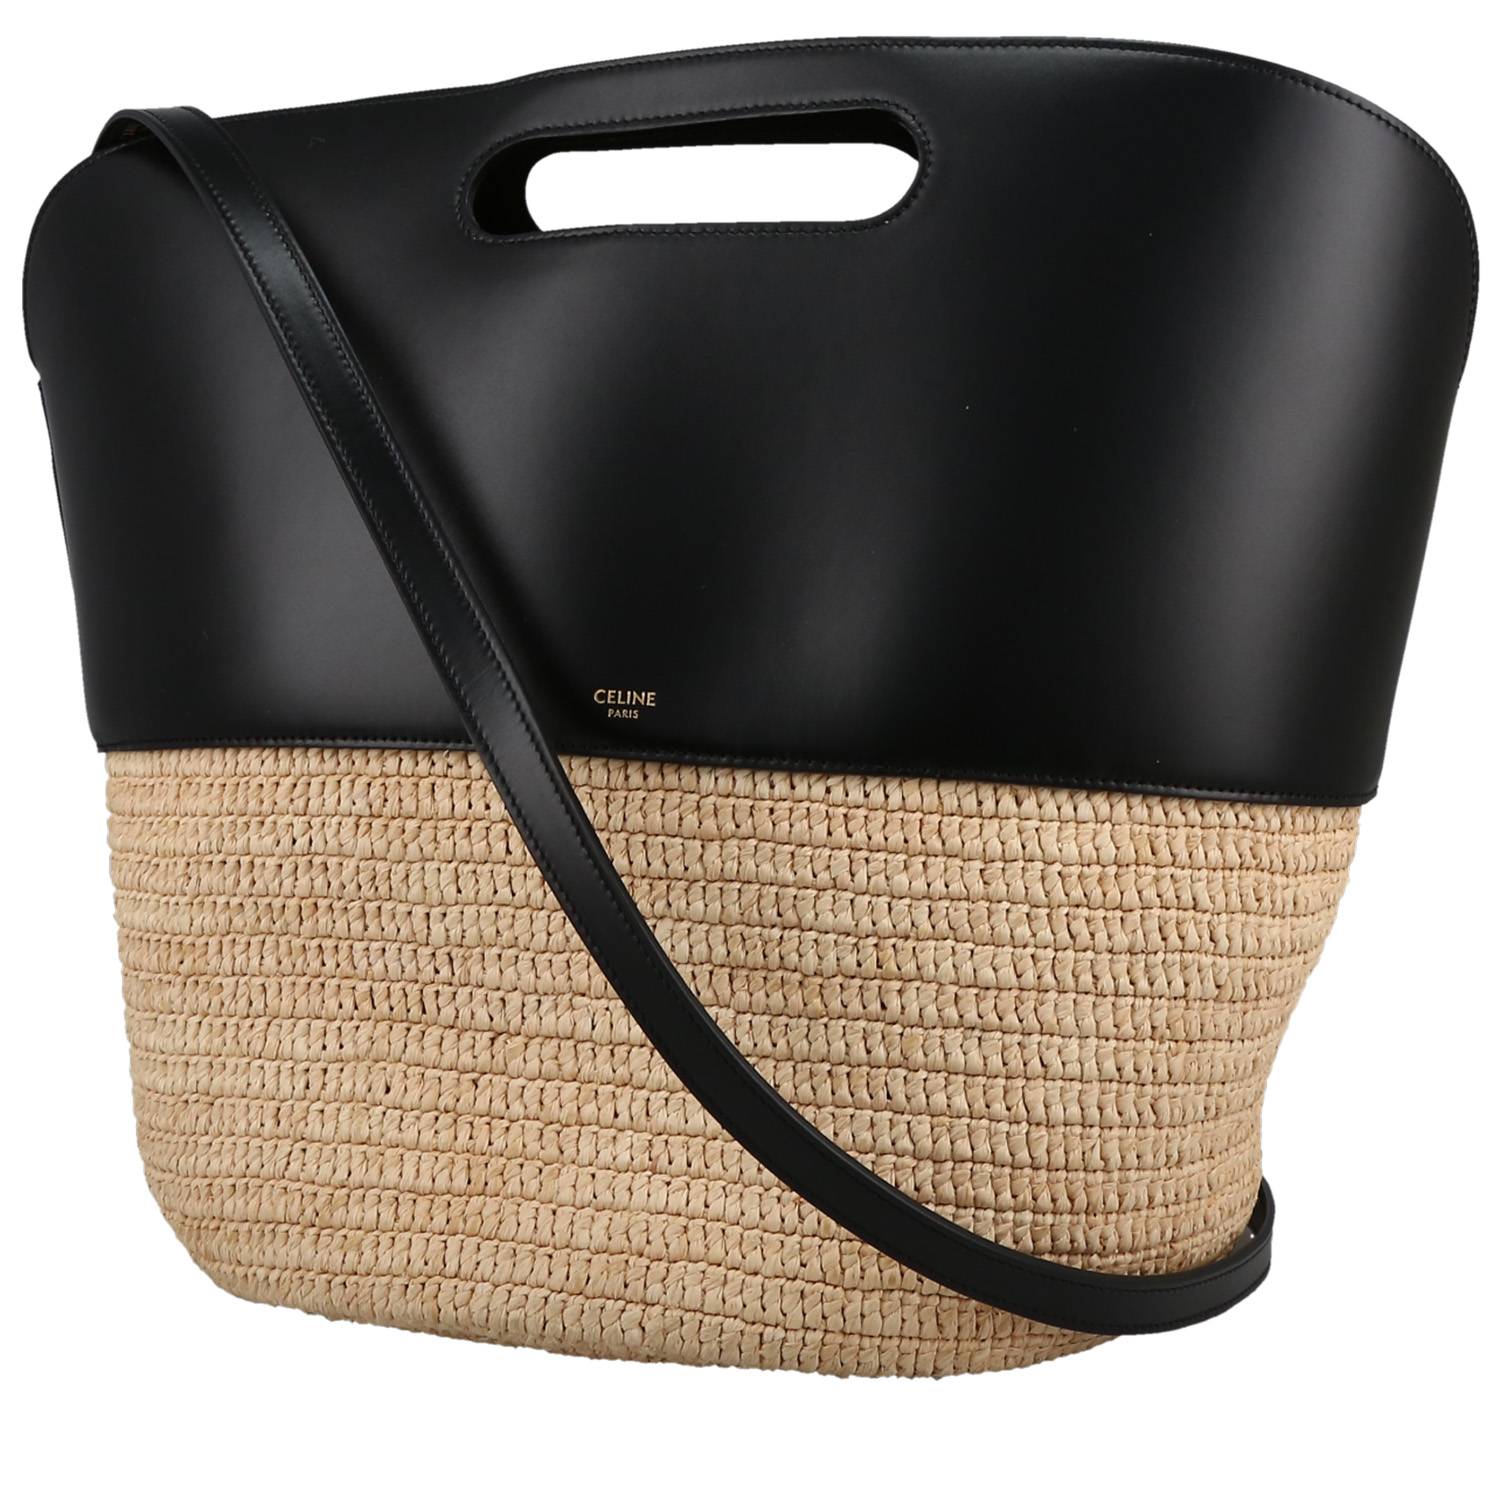 Pili And Bianca Pouch, Black